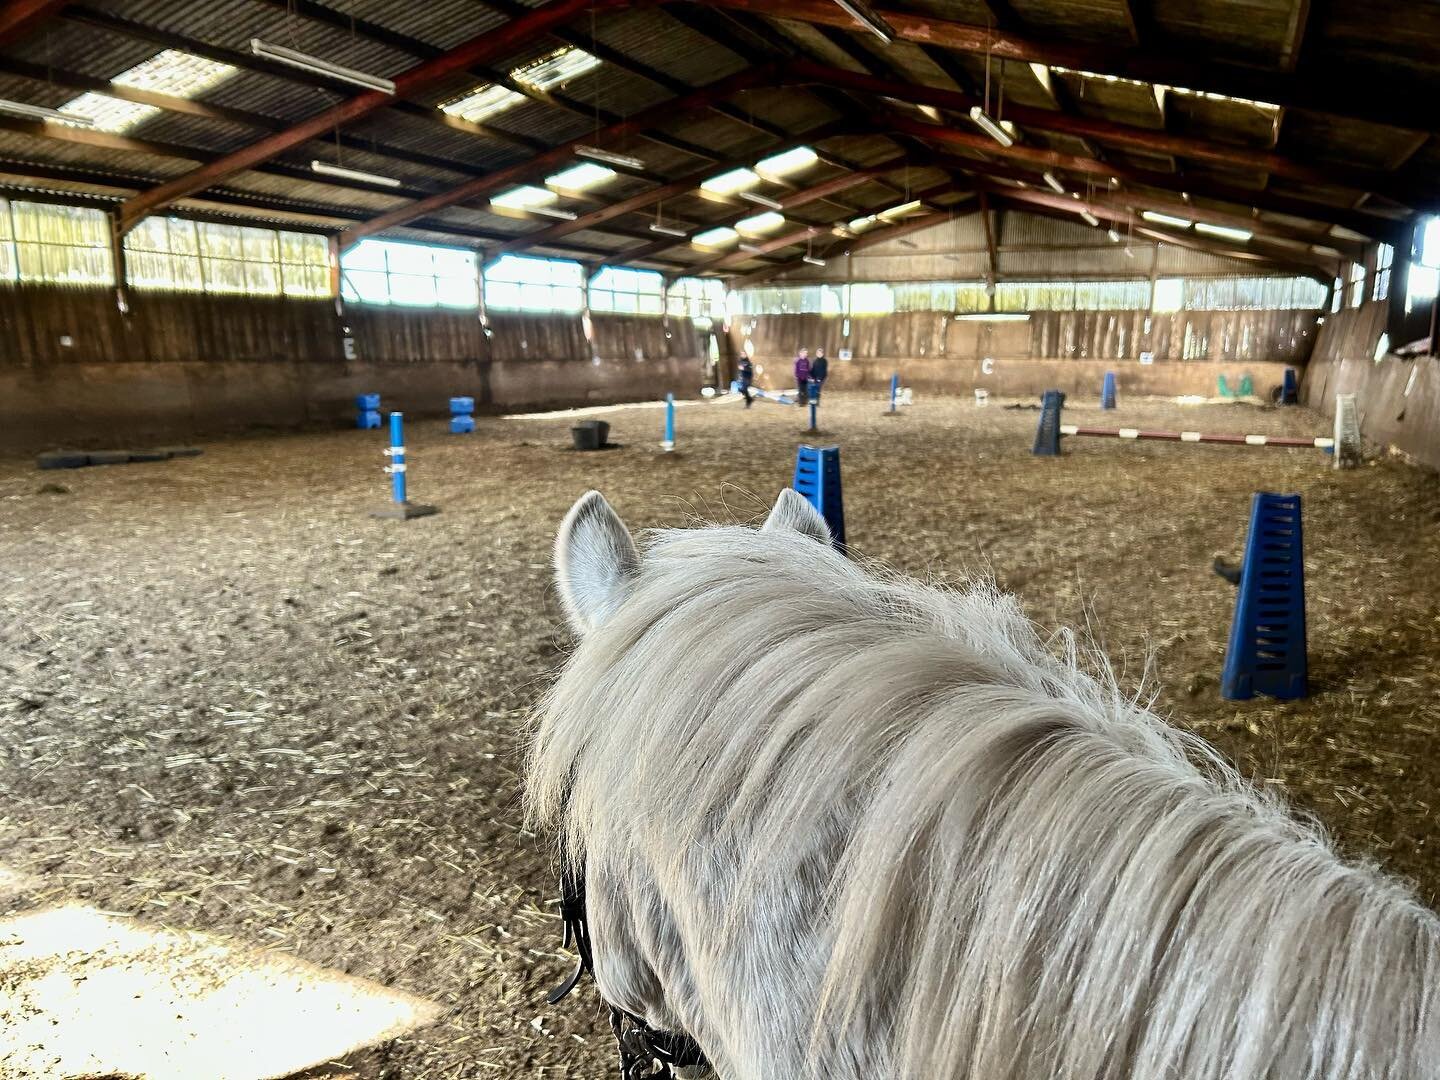 Everyone was ready &amp; rearing to go for their courses today! With straight jumps, cross poles, weaving &amp; tyre steps! It&rsquo;s all about who can get round it the fastest- and the ears pointing straight toward it all in the photo is Applejack,